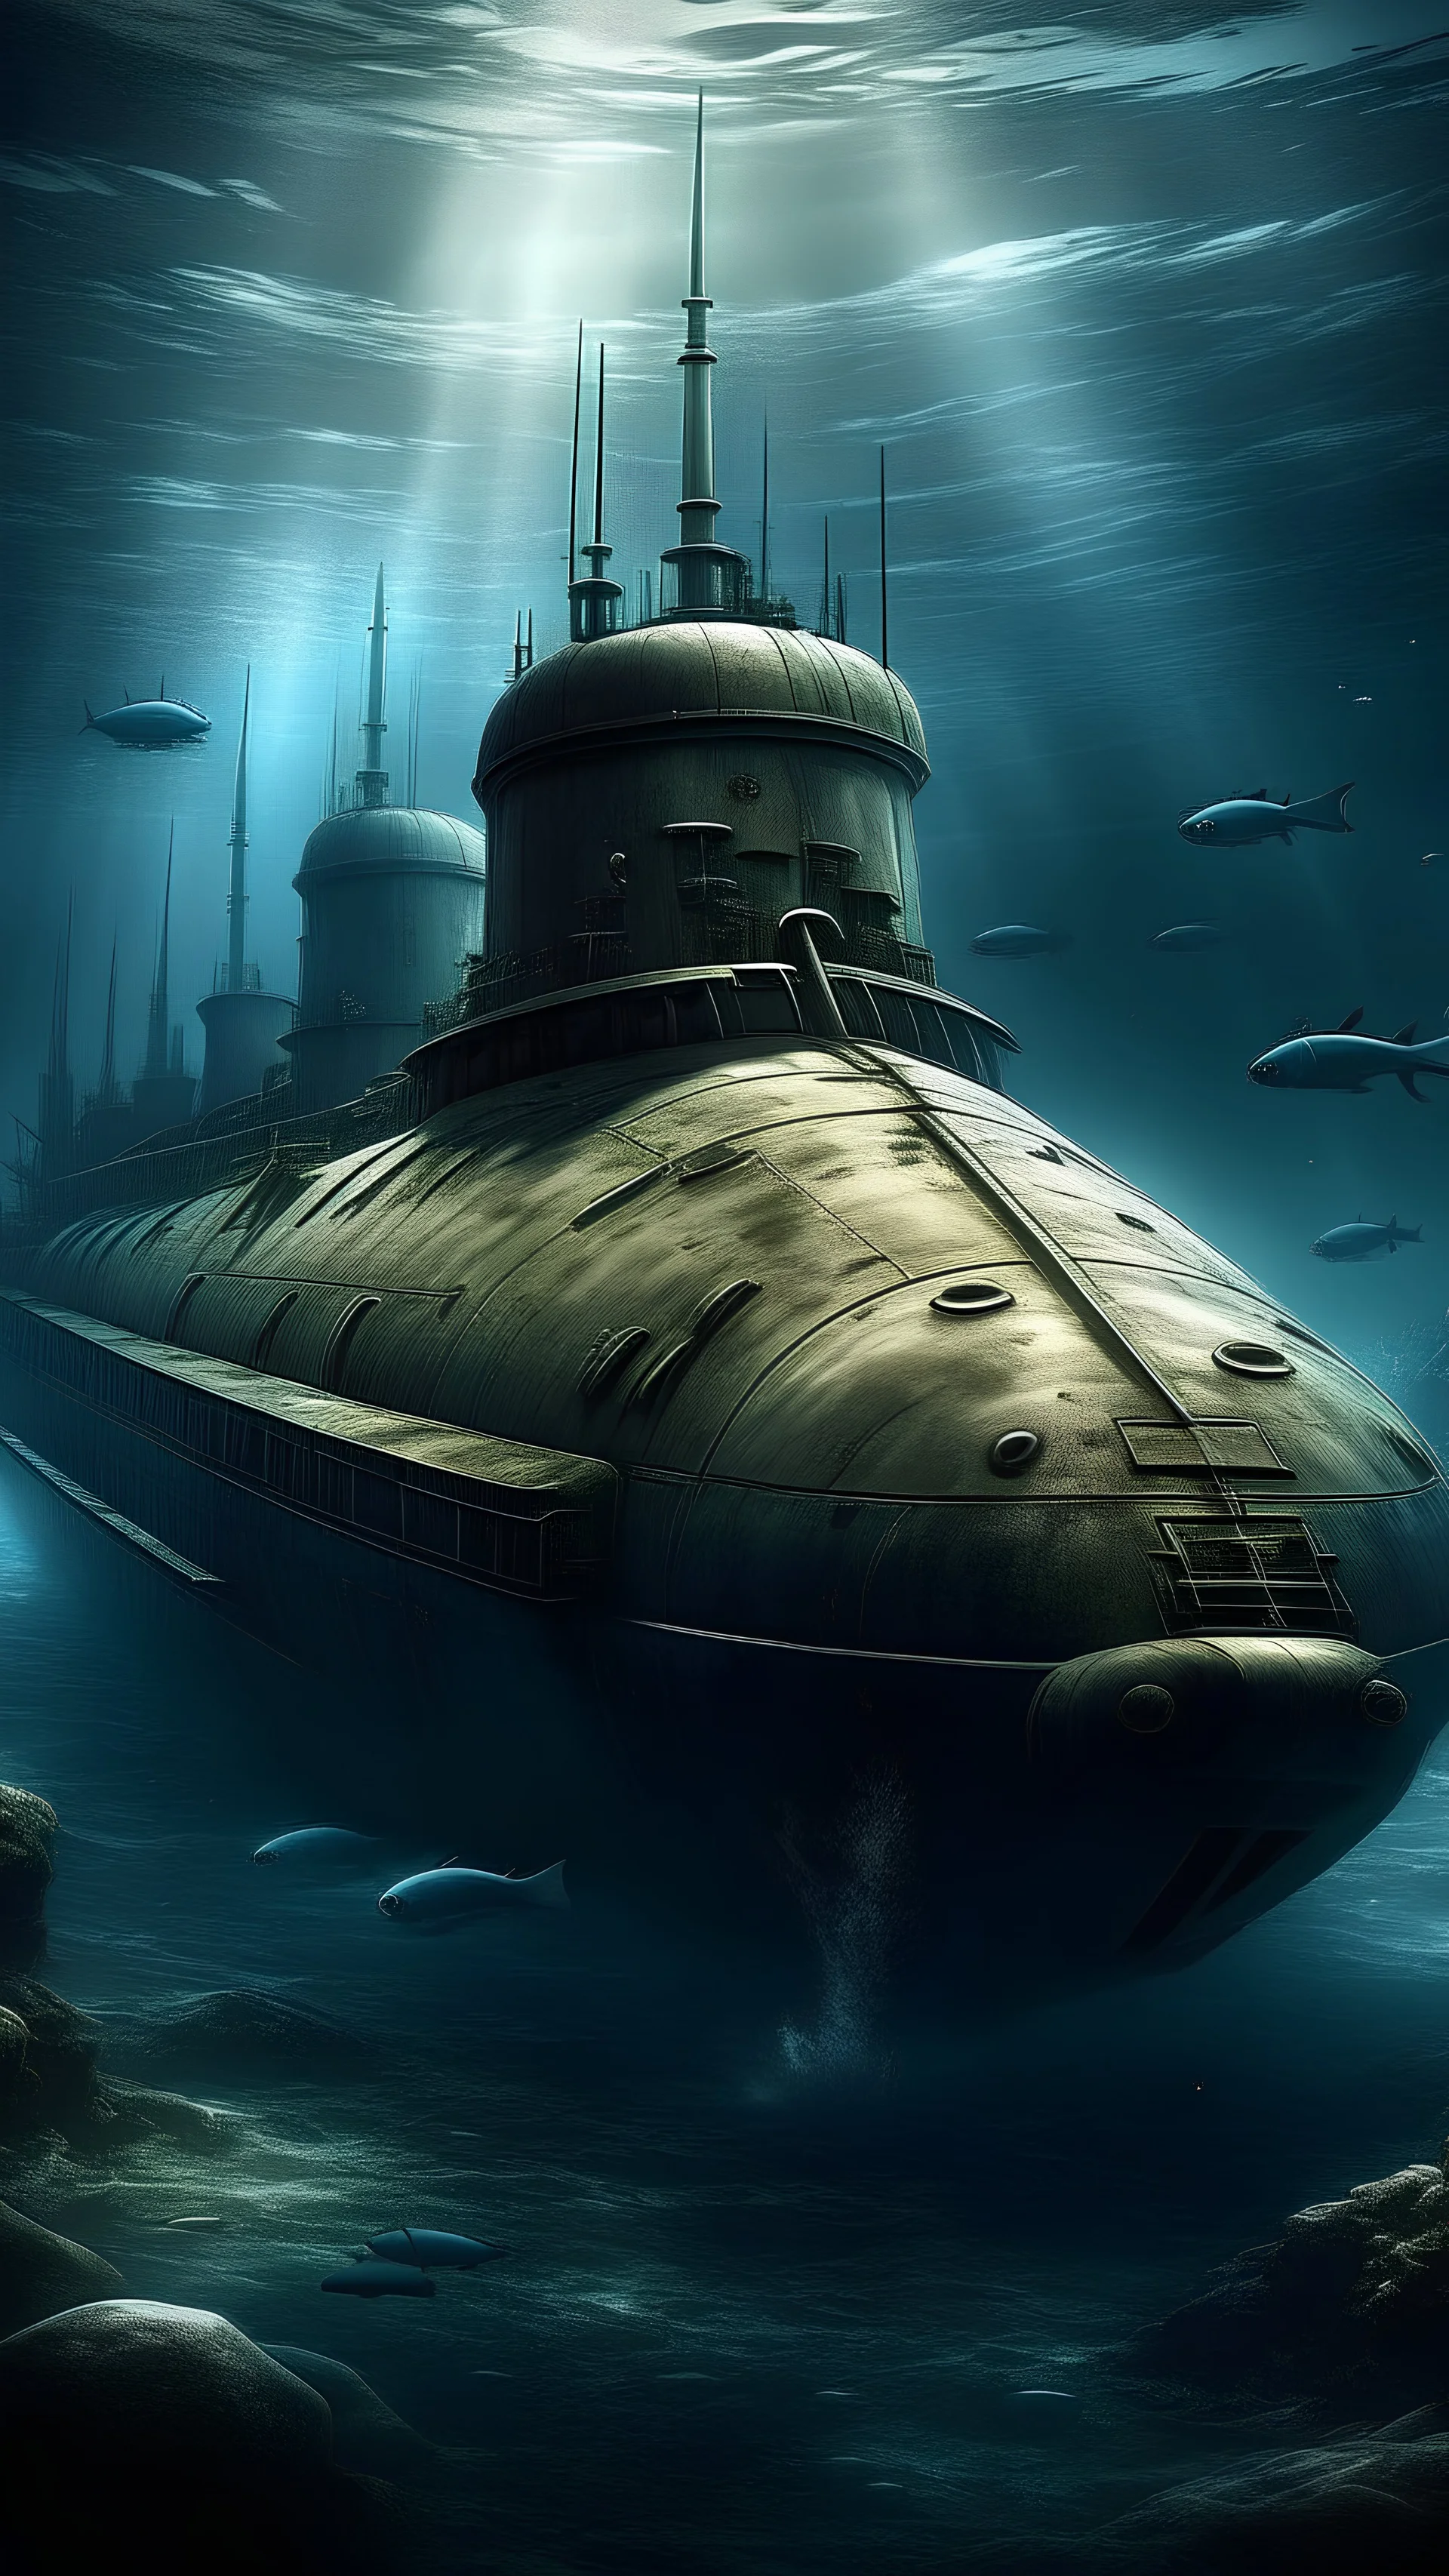 Create an image of english war submarines emerging from the depths.